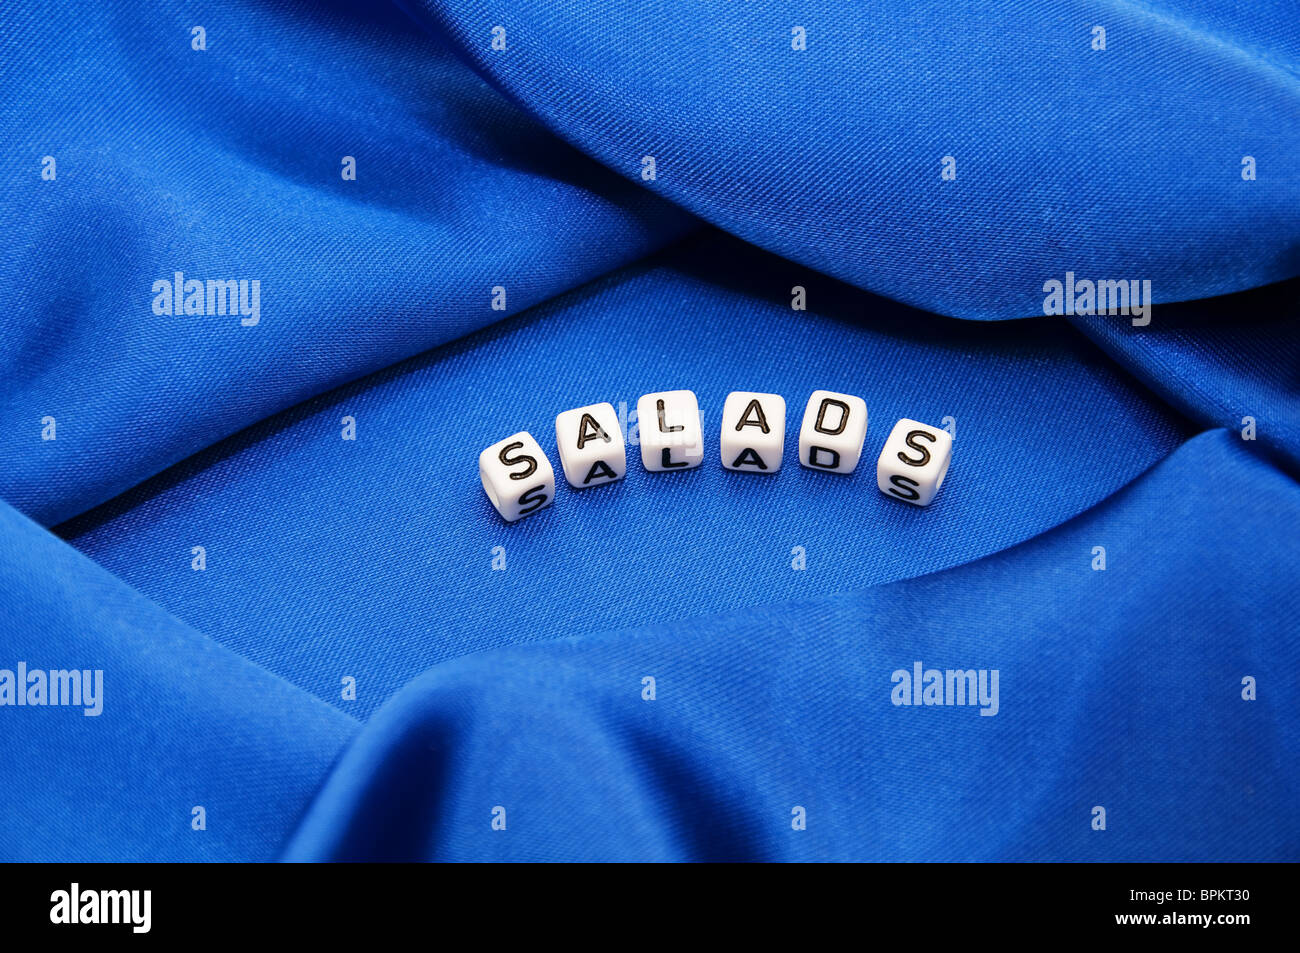 Royal blue satin background with rich folds and wrinkles for texture is the word salads in black and white  lettering series Stock Photo